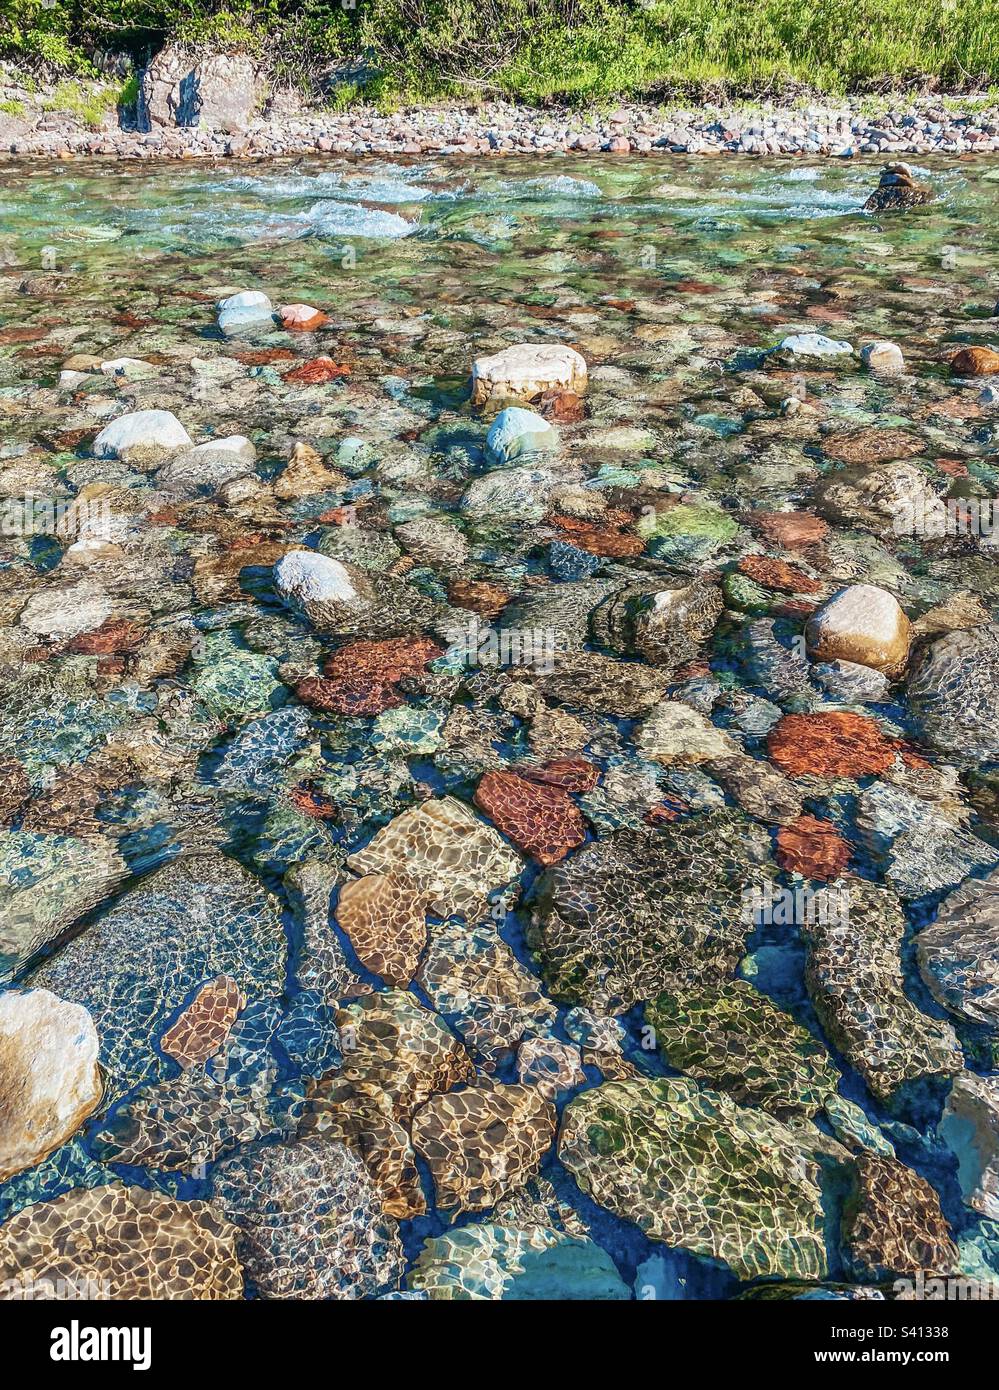 Colorful rocks in a stream with clear water running over them Stock Photo